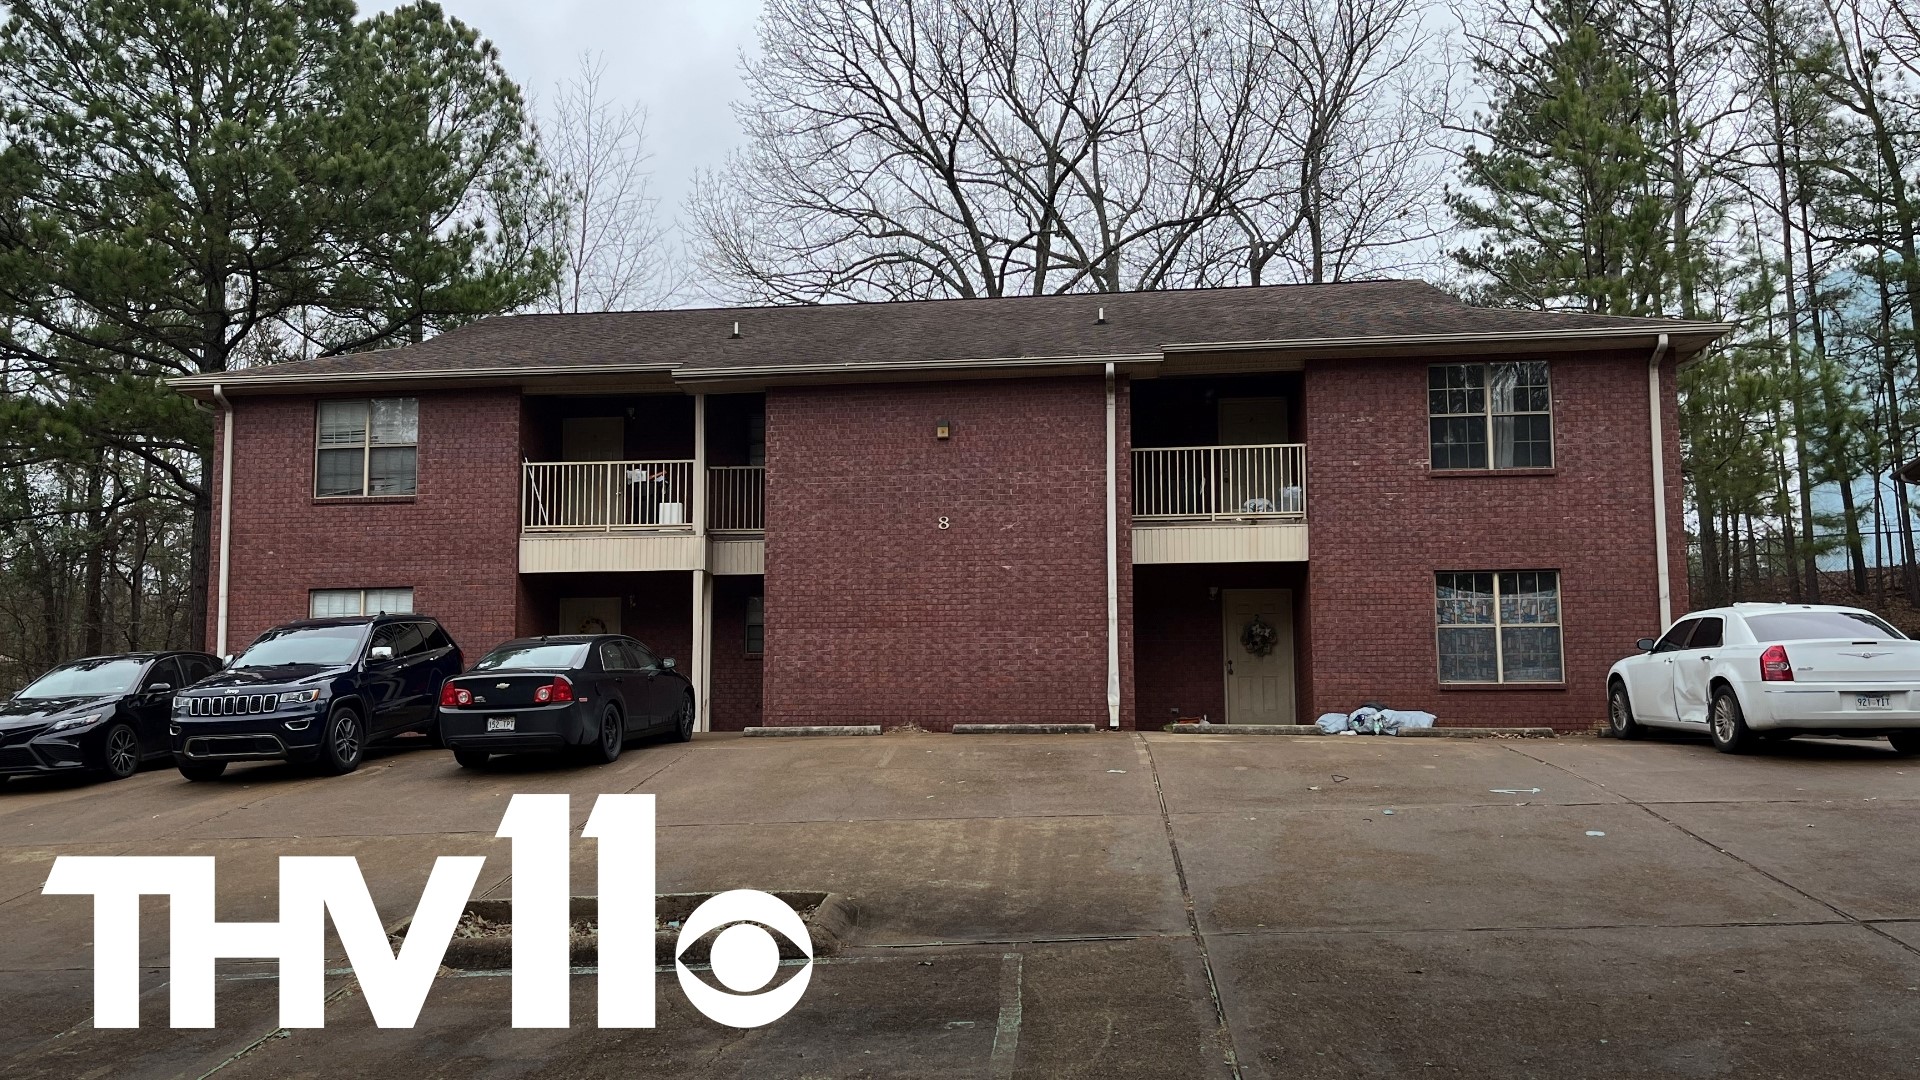 Neighbors are reacting to a double homicide that happened during an alleged robbery at a local apartment complex in Arkadelphia on Friday.